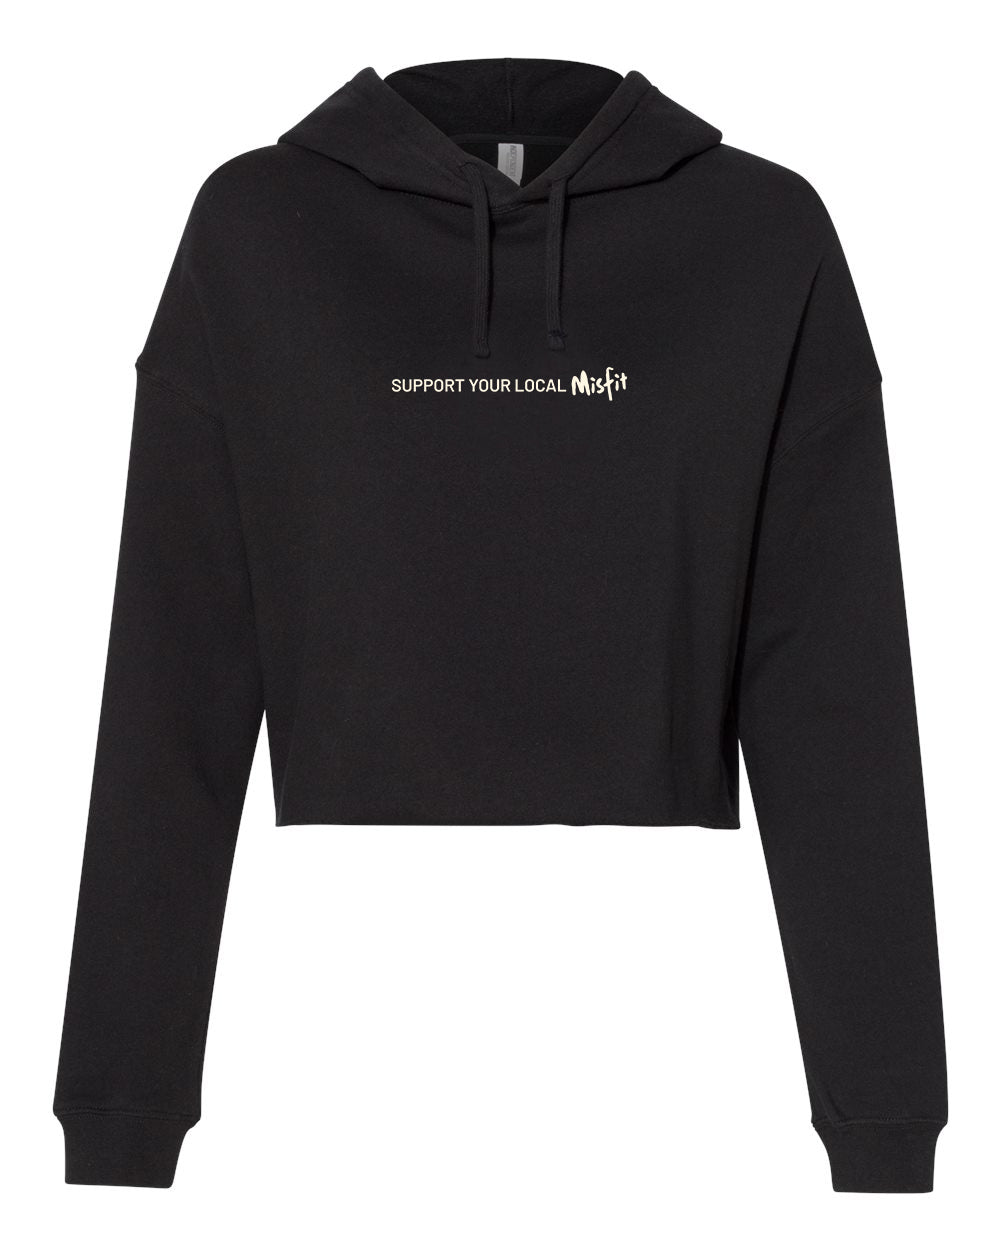 Support Your Local Misfit Cropped Hoodie for Women by Seen Not Seen